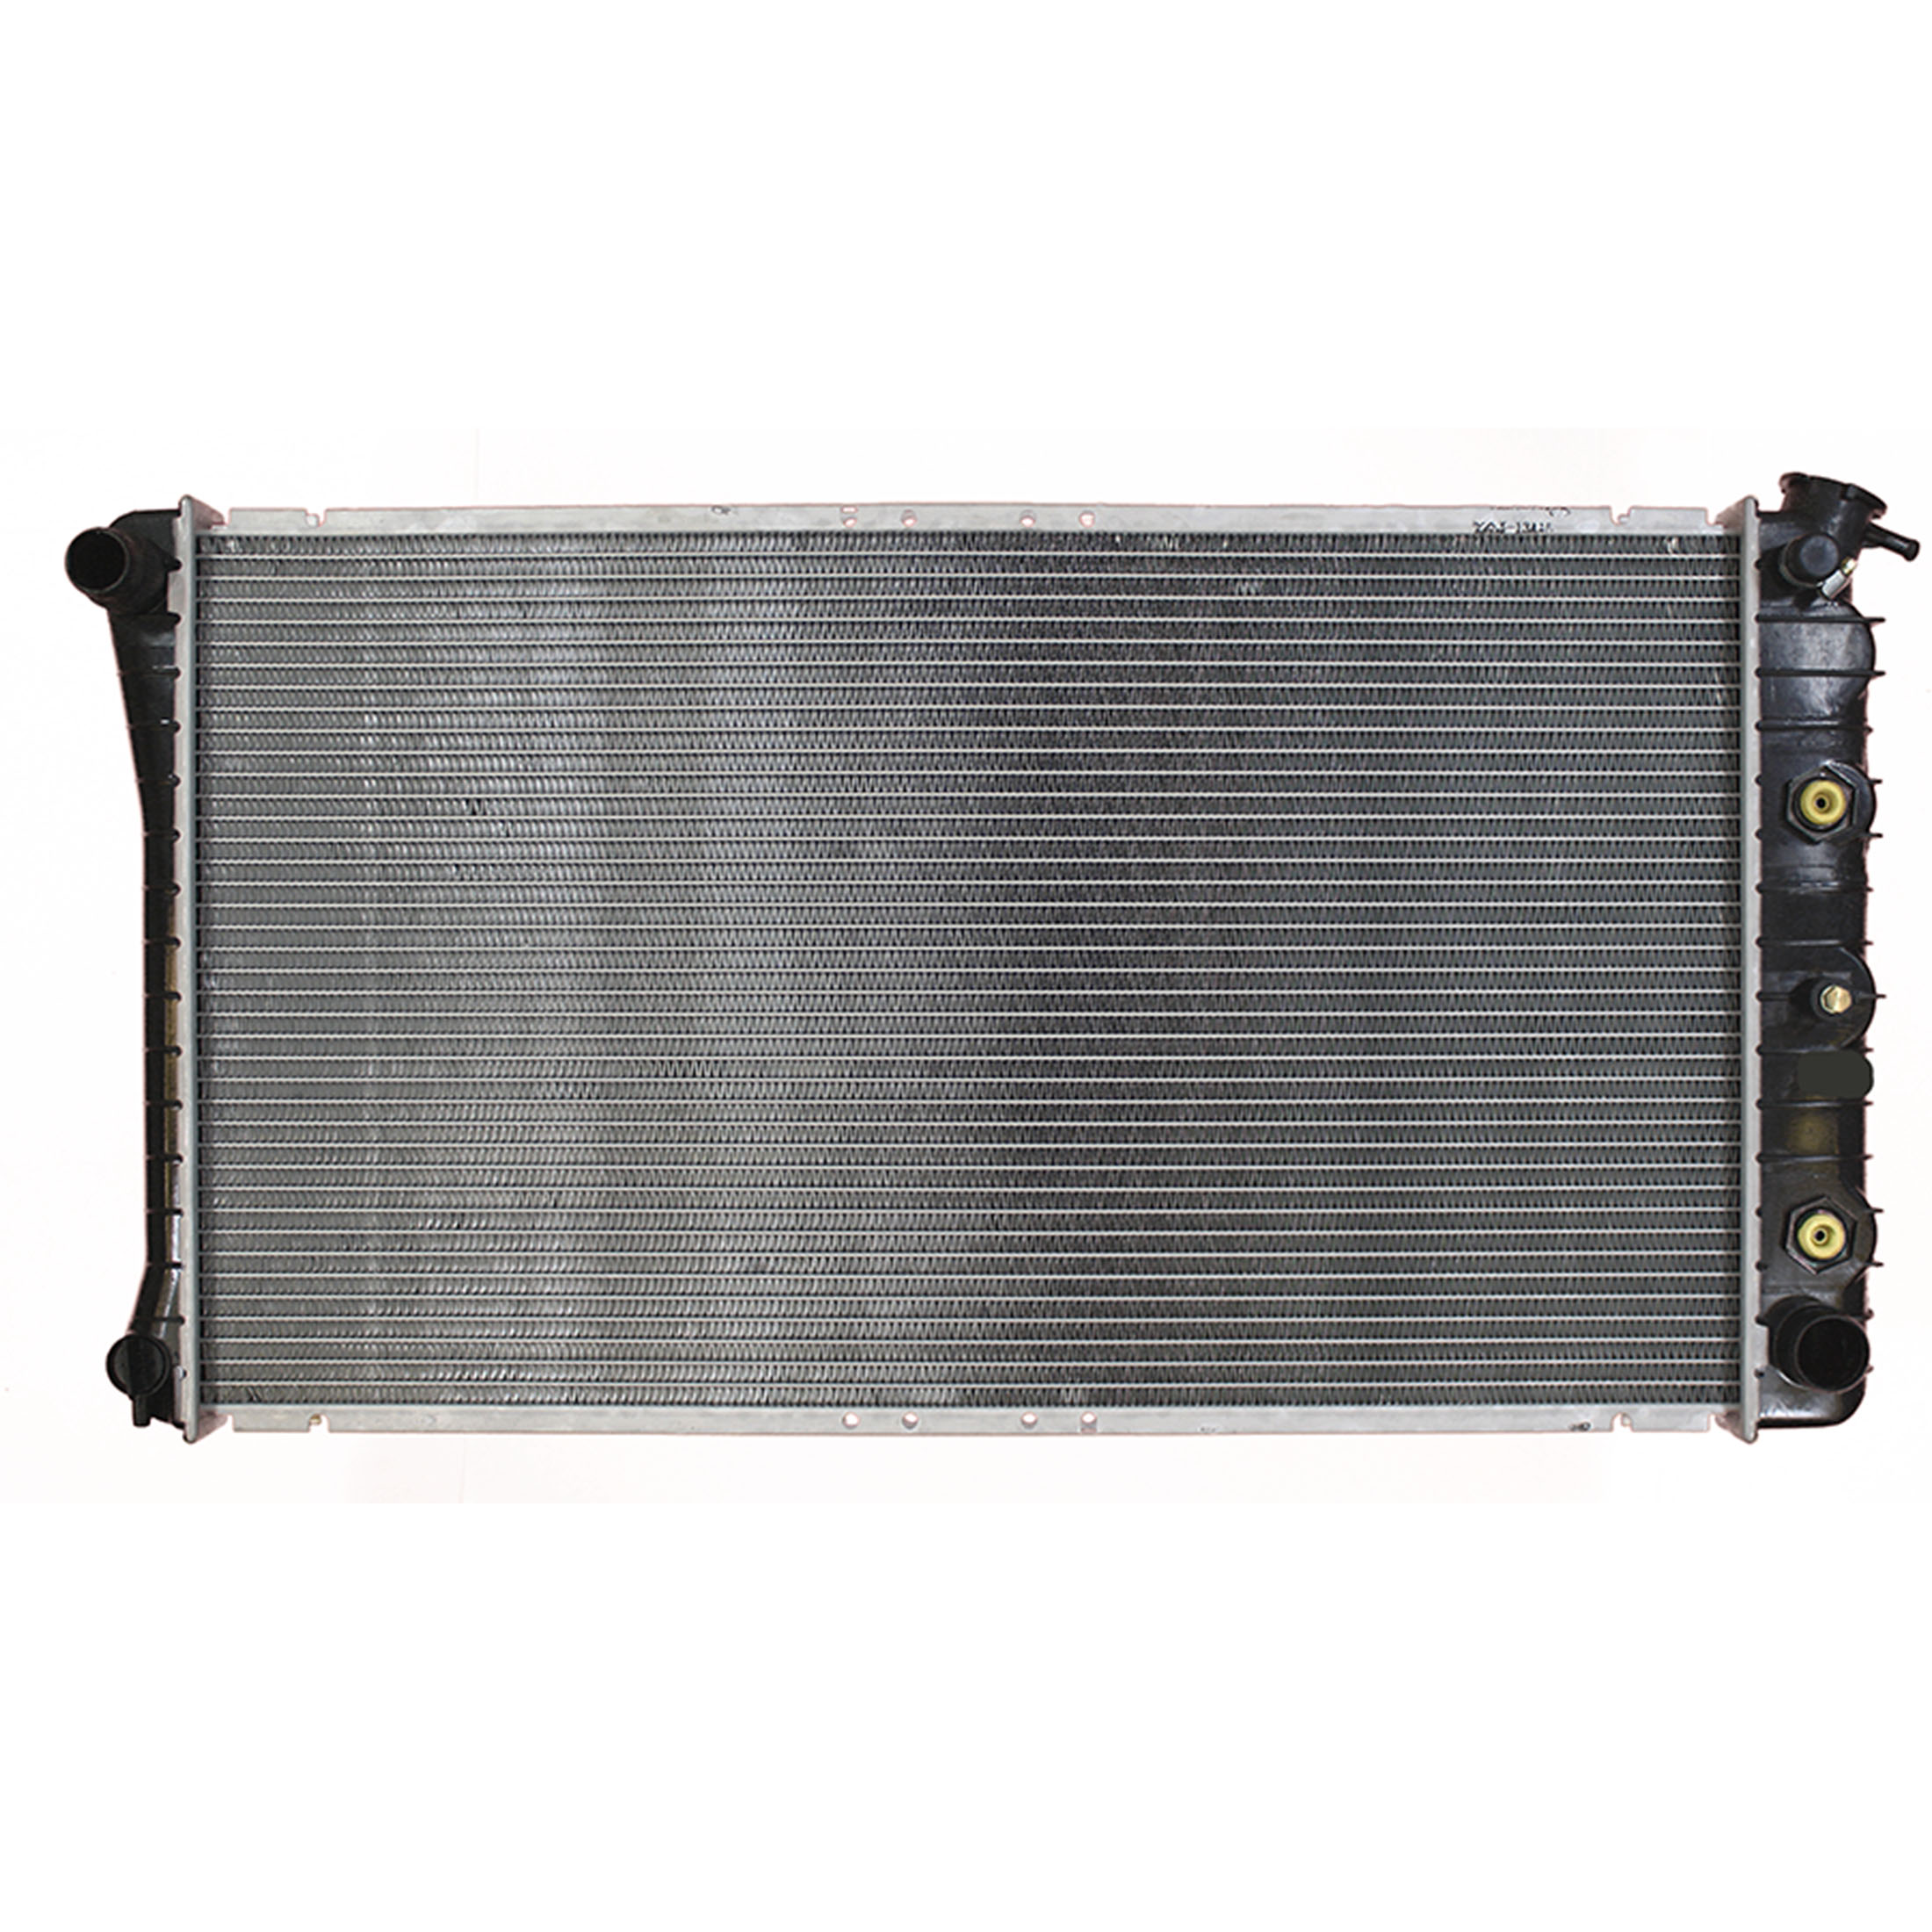 Agility Auto Parts 8010232 Radiator for Buick, Cadillac, Olds, Pontiac Specific Models Fits select: 1977-1982 CADILLAC DEVILLE, 1987-1992 CADILLAC BROUGHAM - image 1 of 4